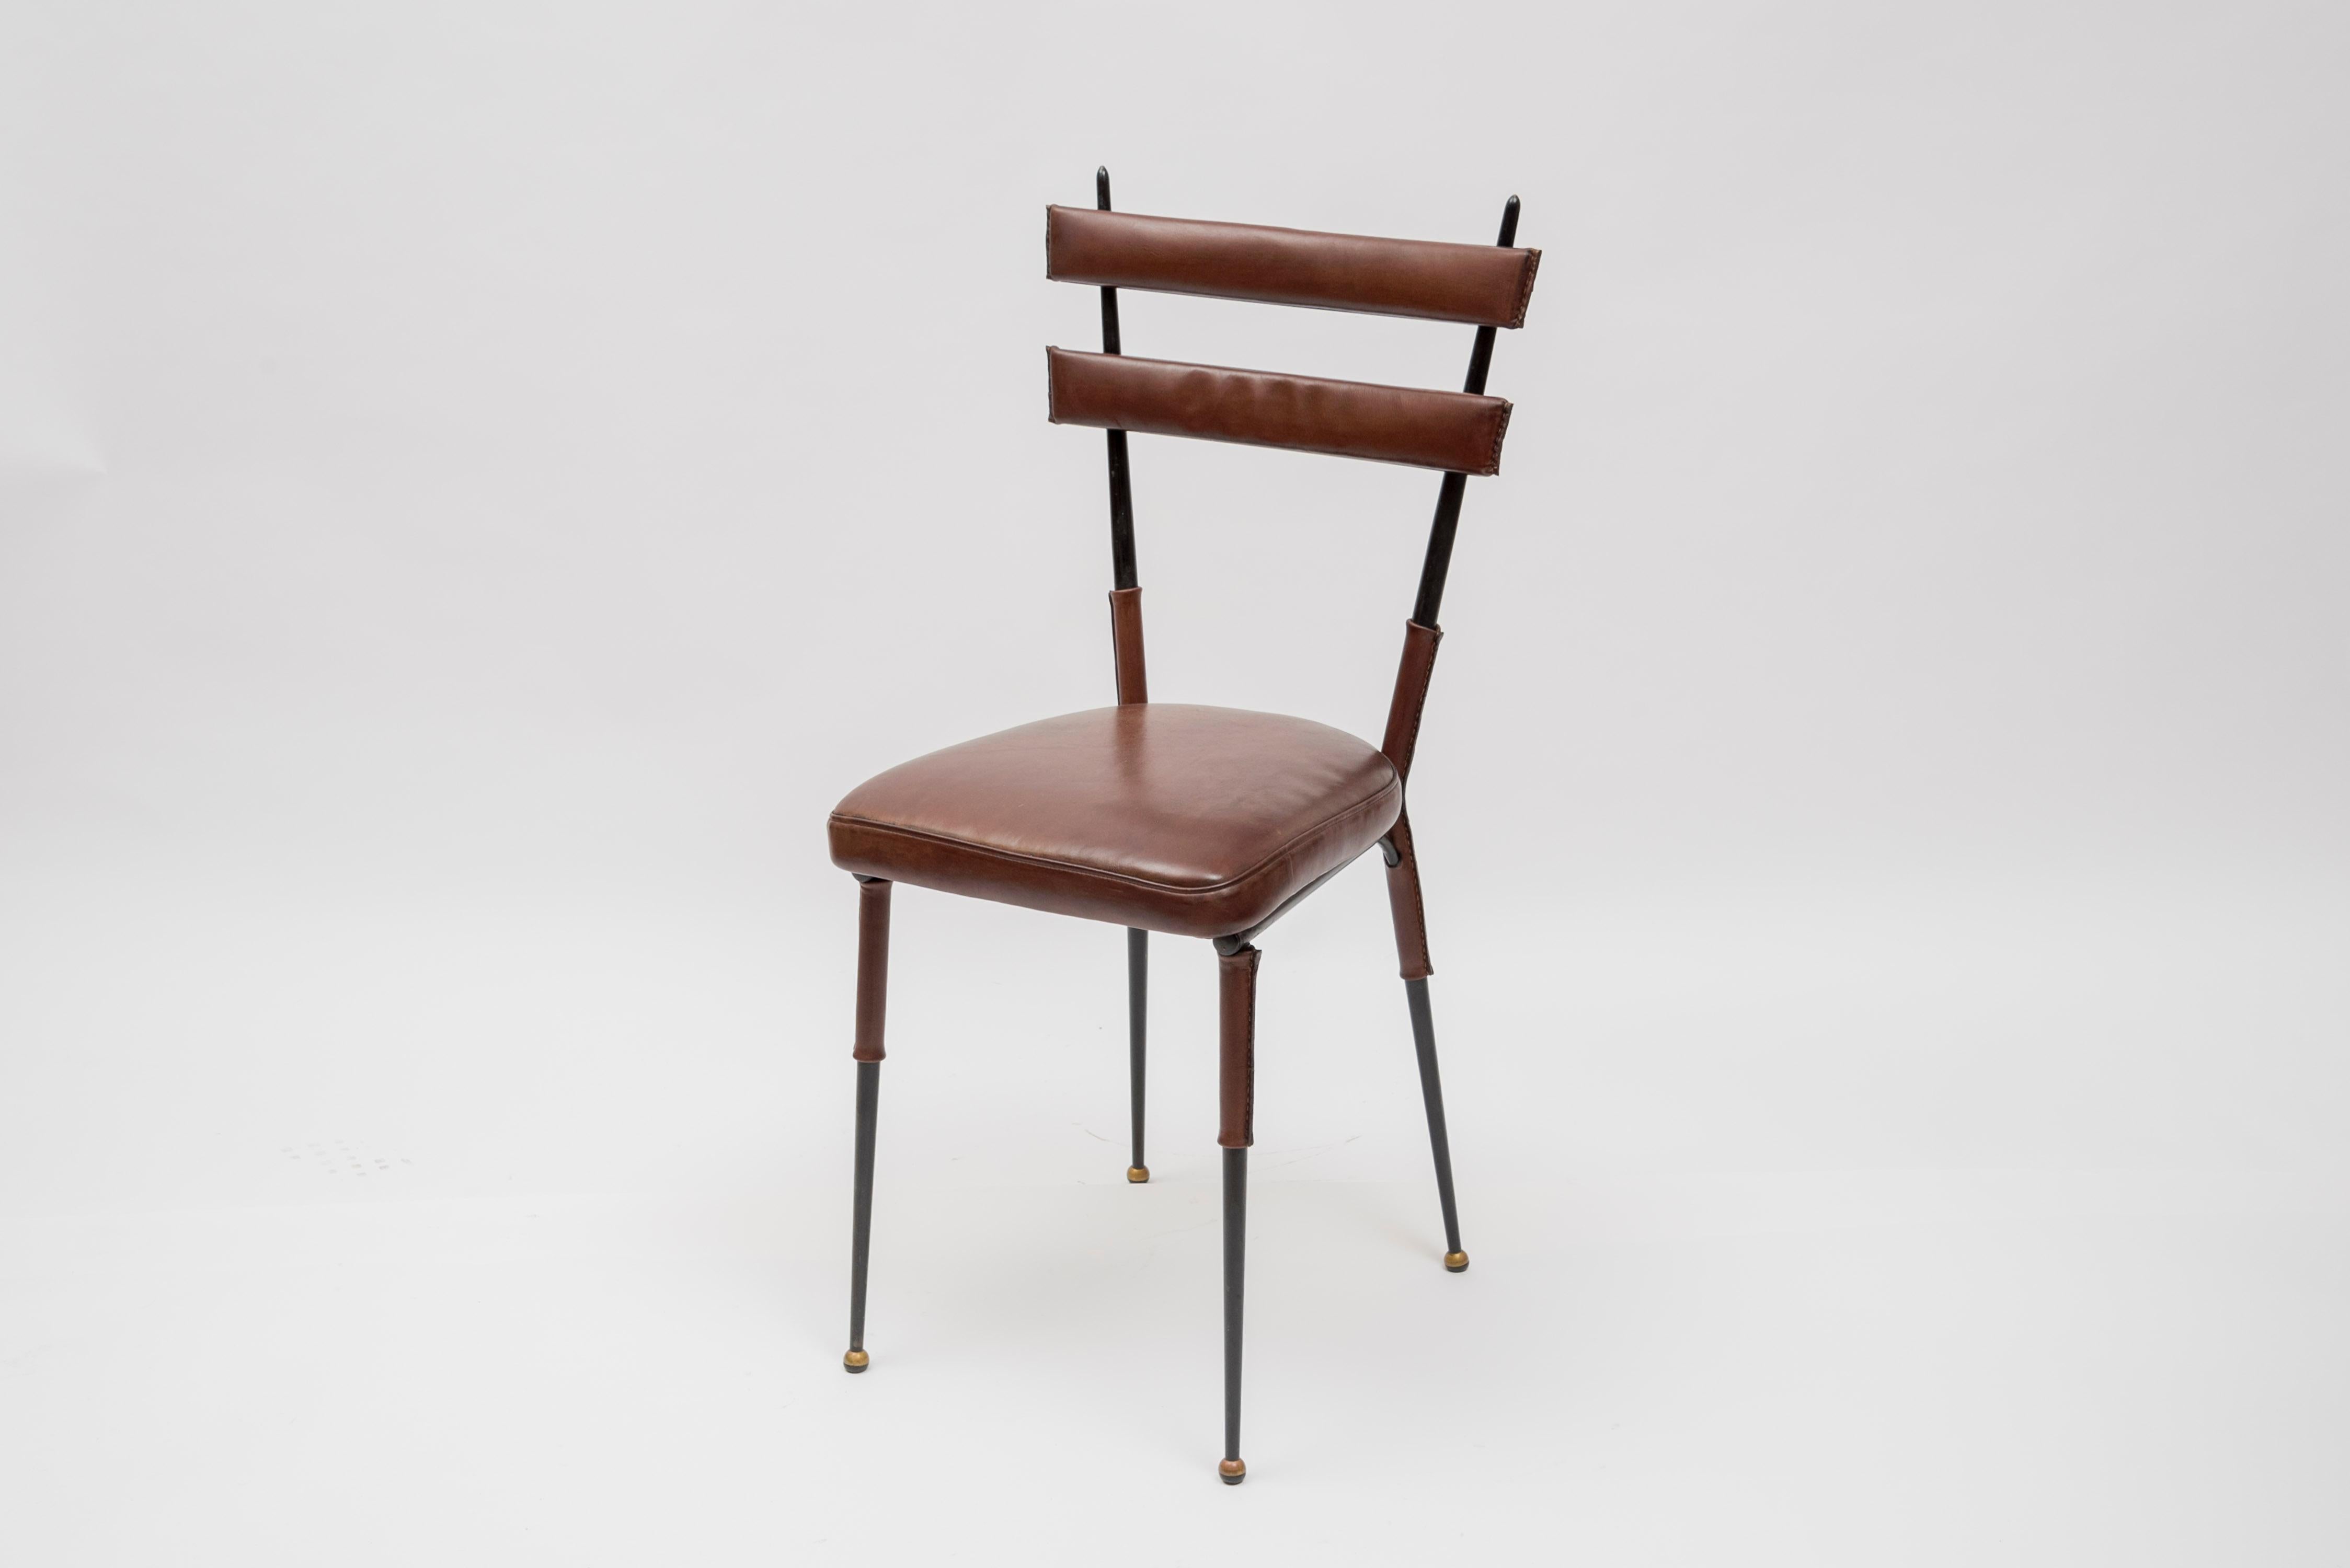 Set of 4 chairs in stitched Leather by Jacques Adnet
Leather and metal
1950s
France.